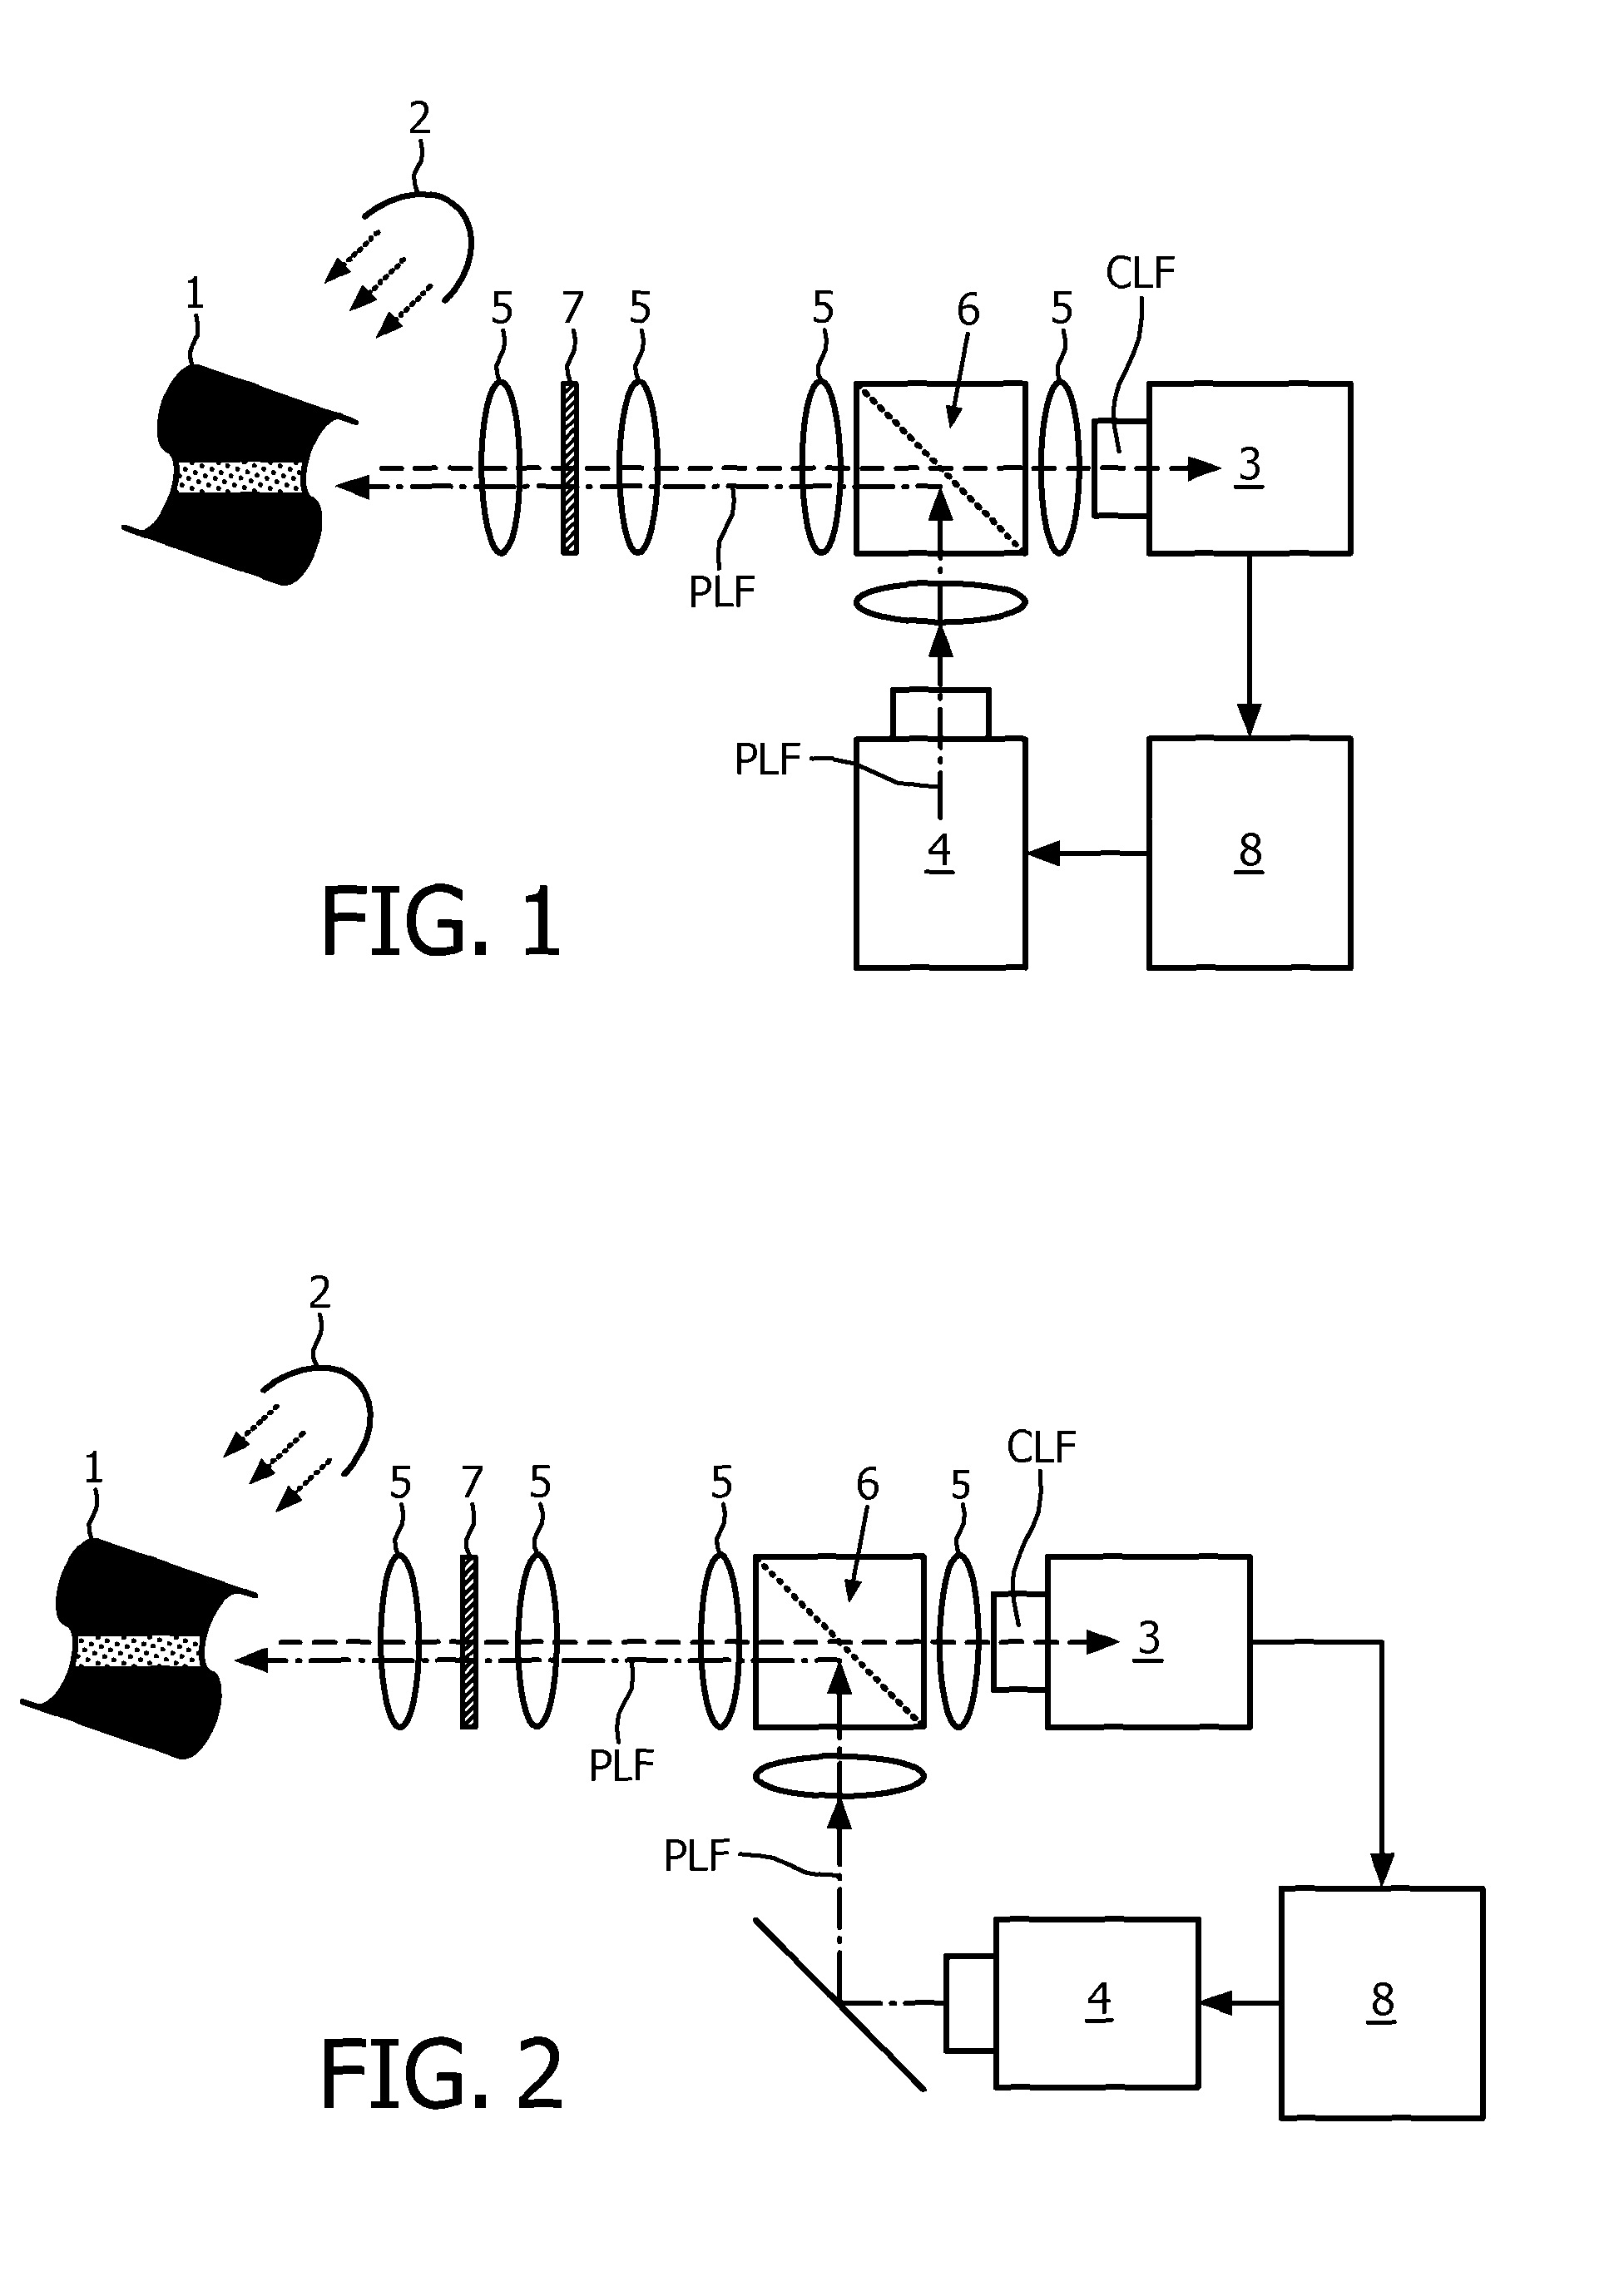 System for hyperspectral imaging in visible light, method for recording a hyperspectral image and displaying the hyperspectral image in visible light